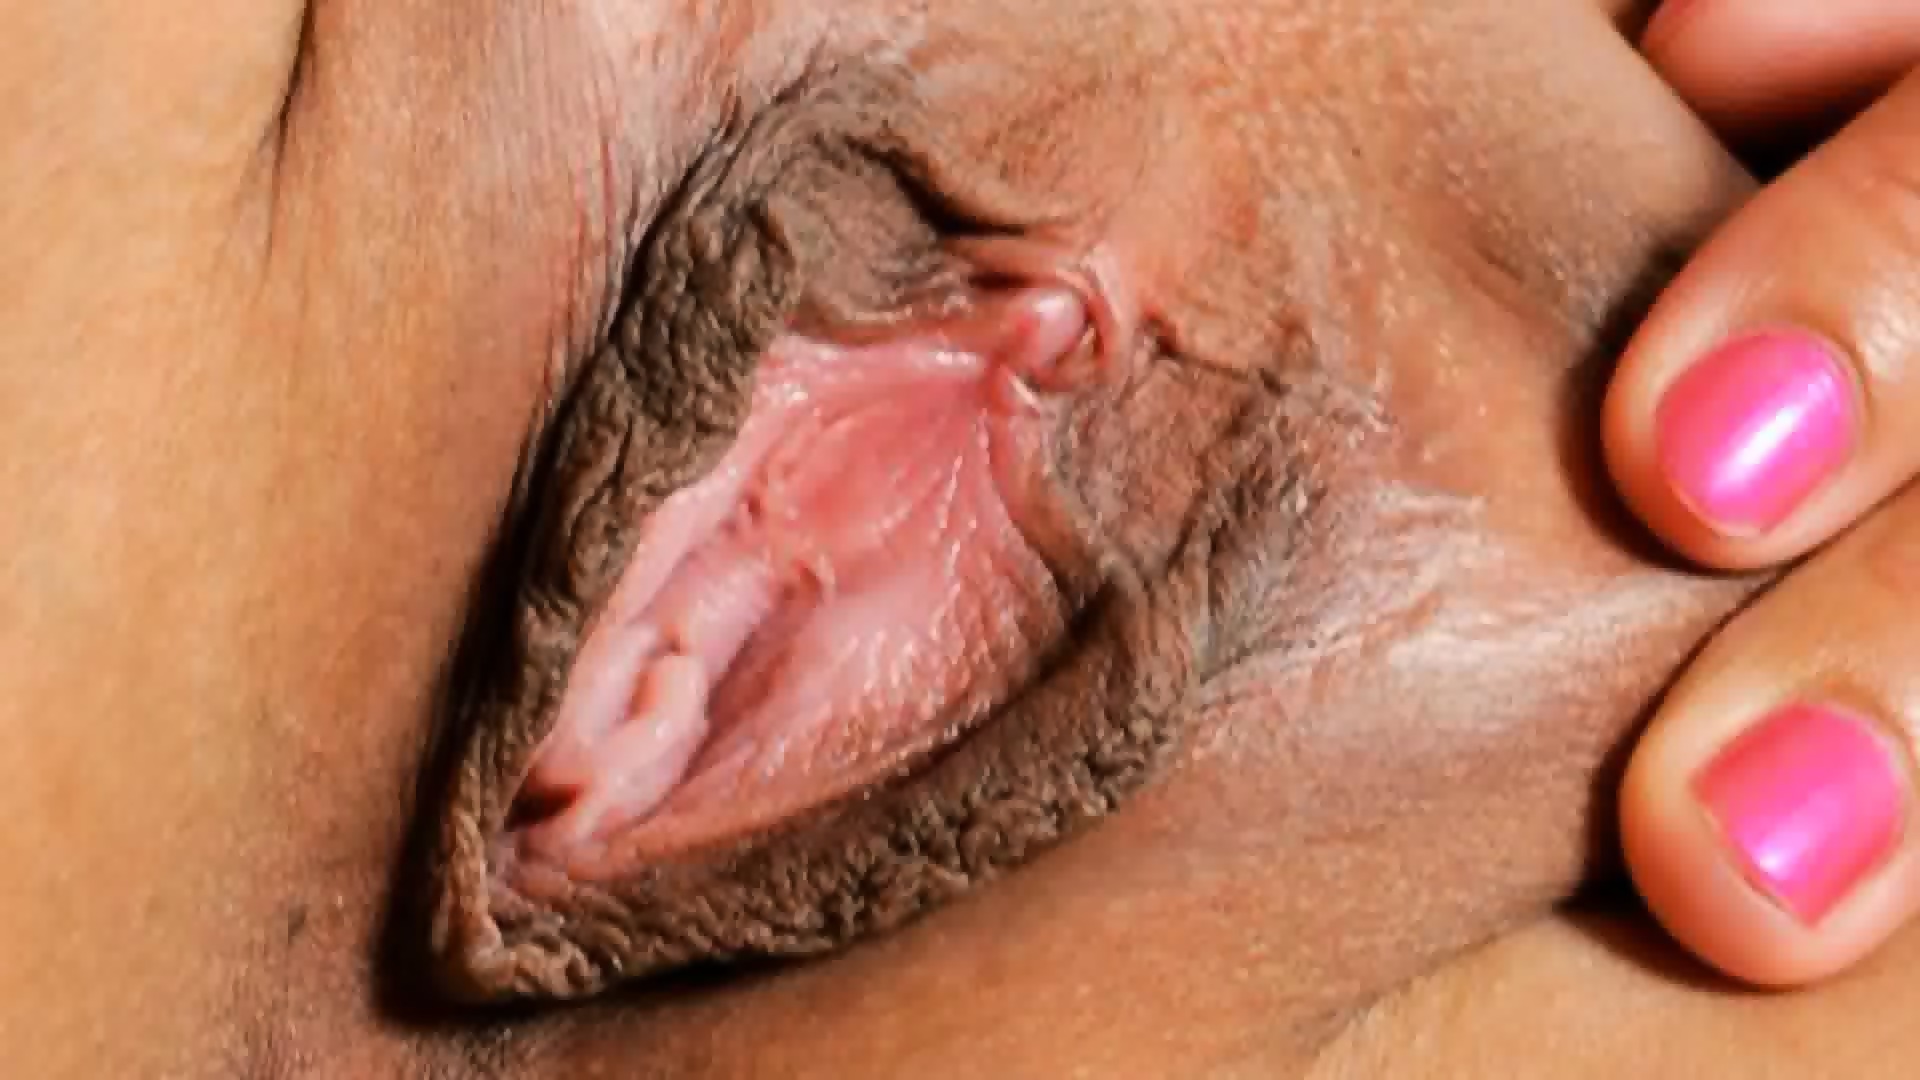 Female Textures Push My Pink Button Hd 1080p Vagina Close Up Hairy